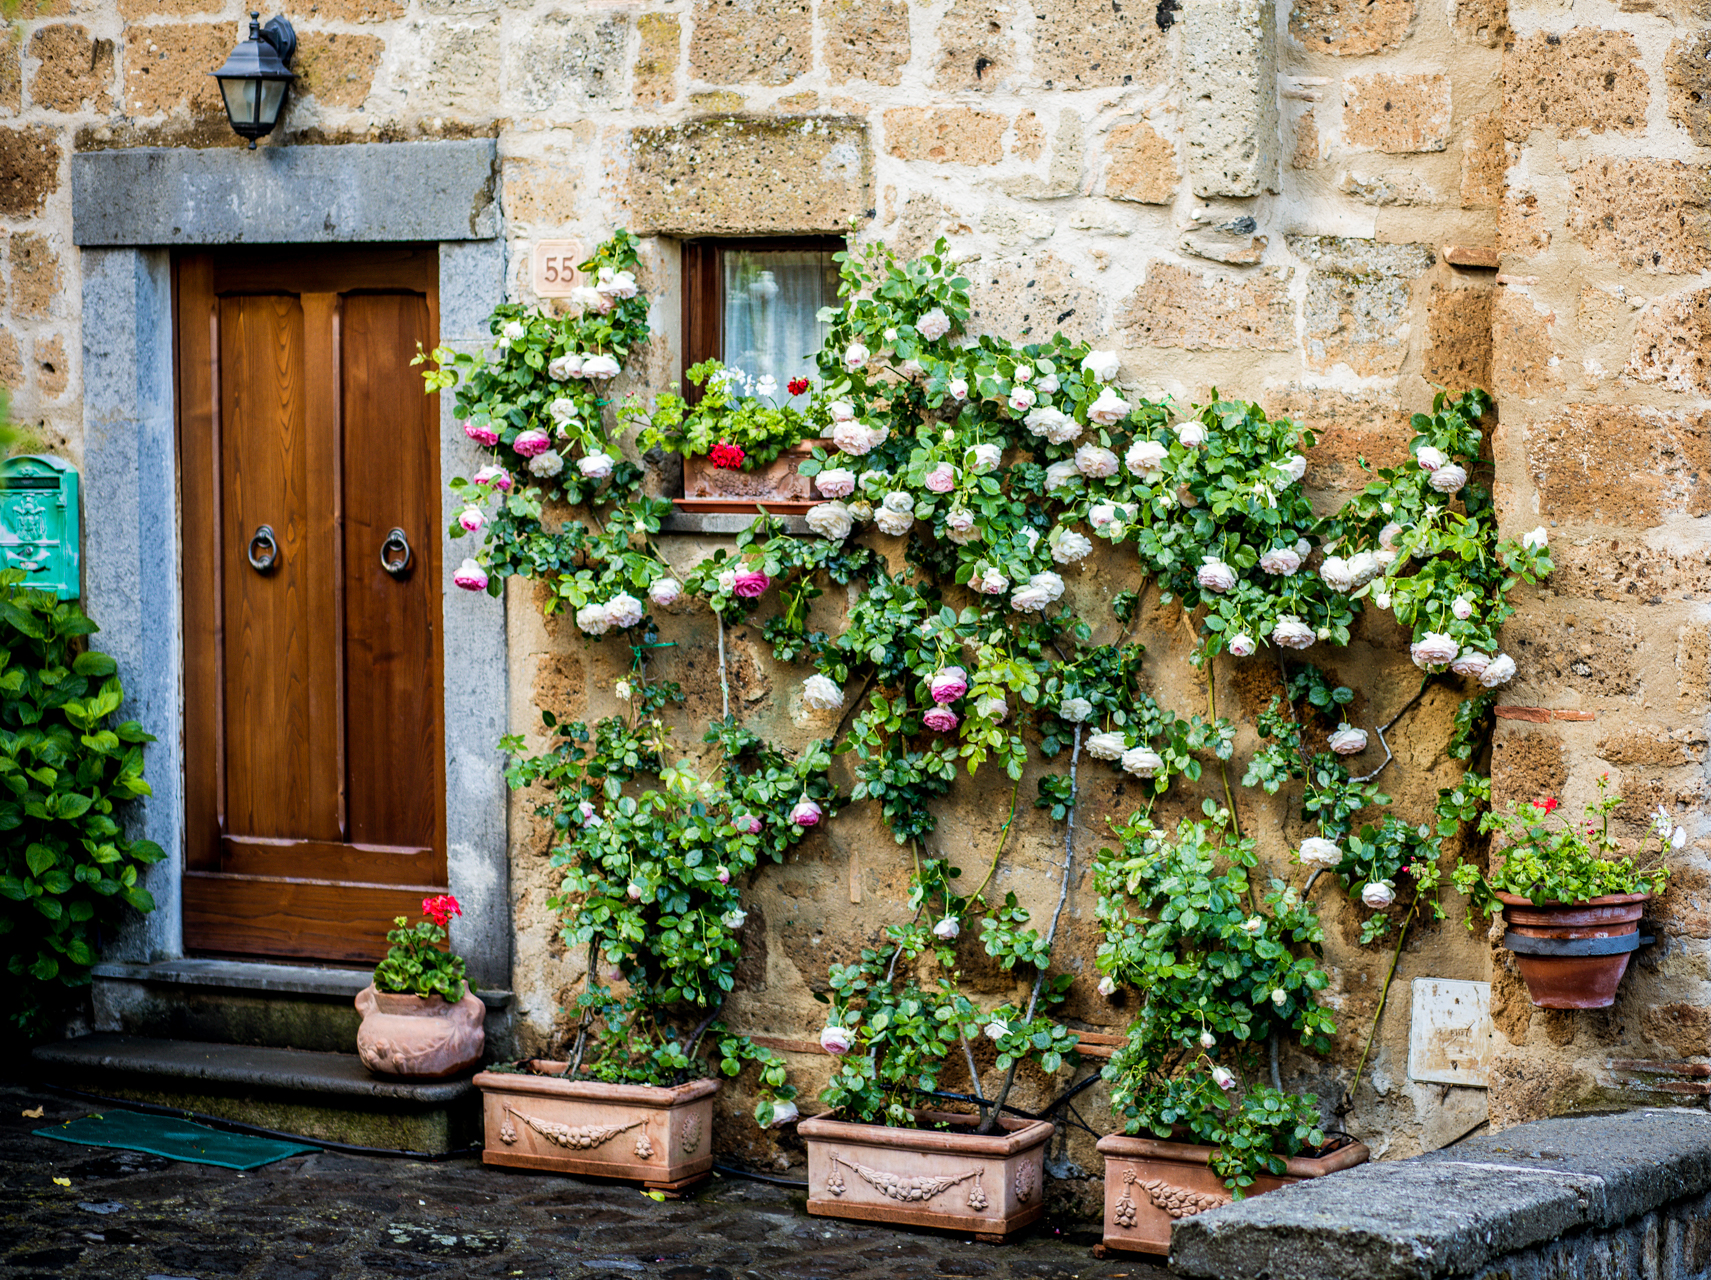 Garden Inspiration: Garden Ideas From Tuscany | Tuscany Garden Ideas by popular New England travel blogger, Shannon Shipman: image of pink roses growing up the side of a stone building. 